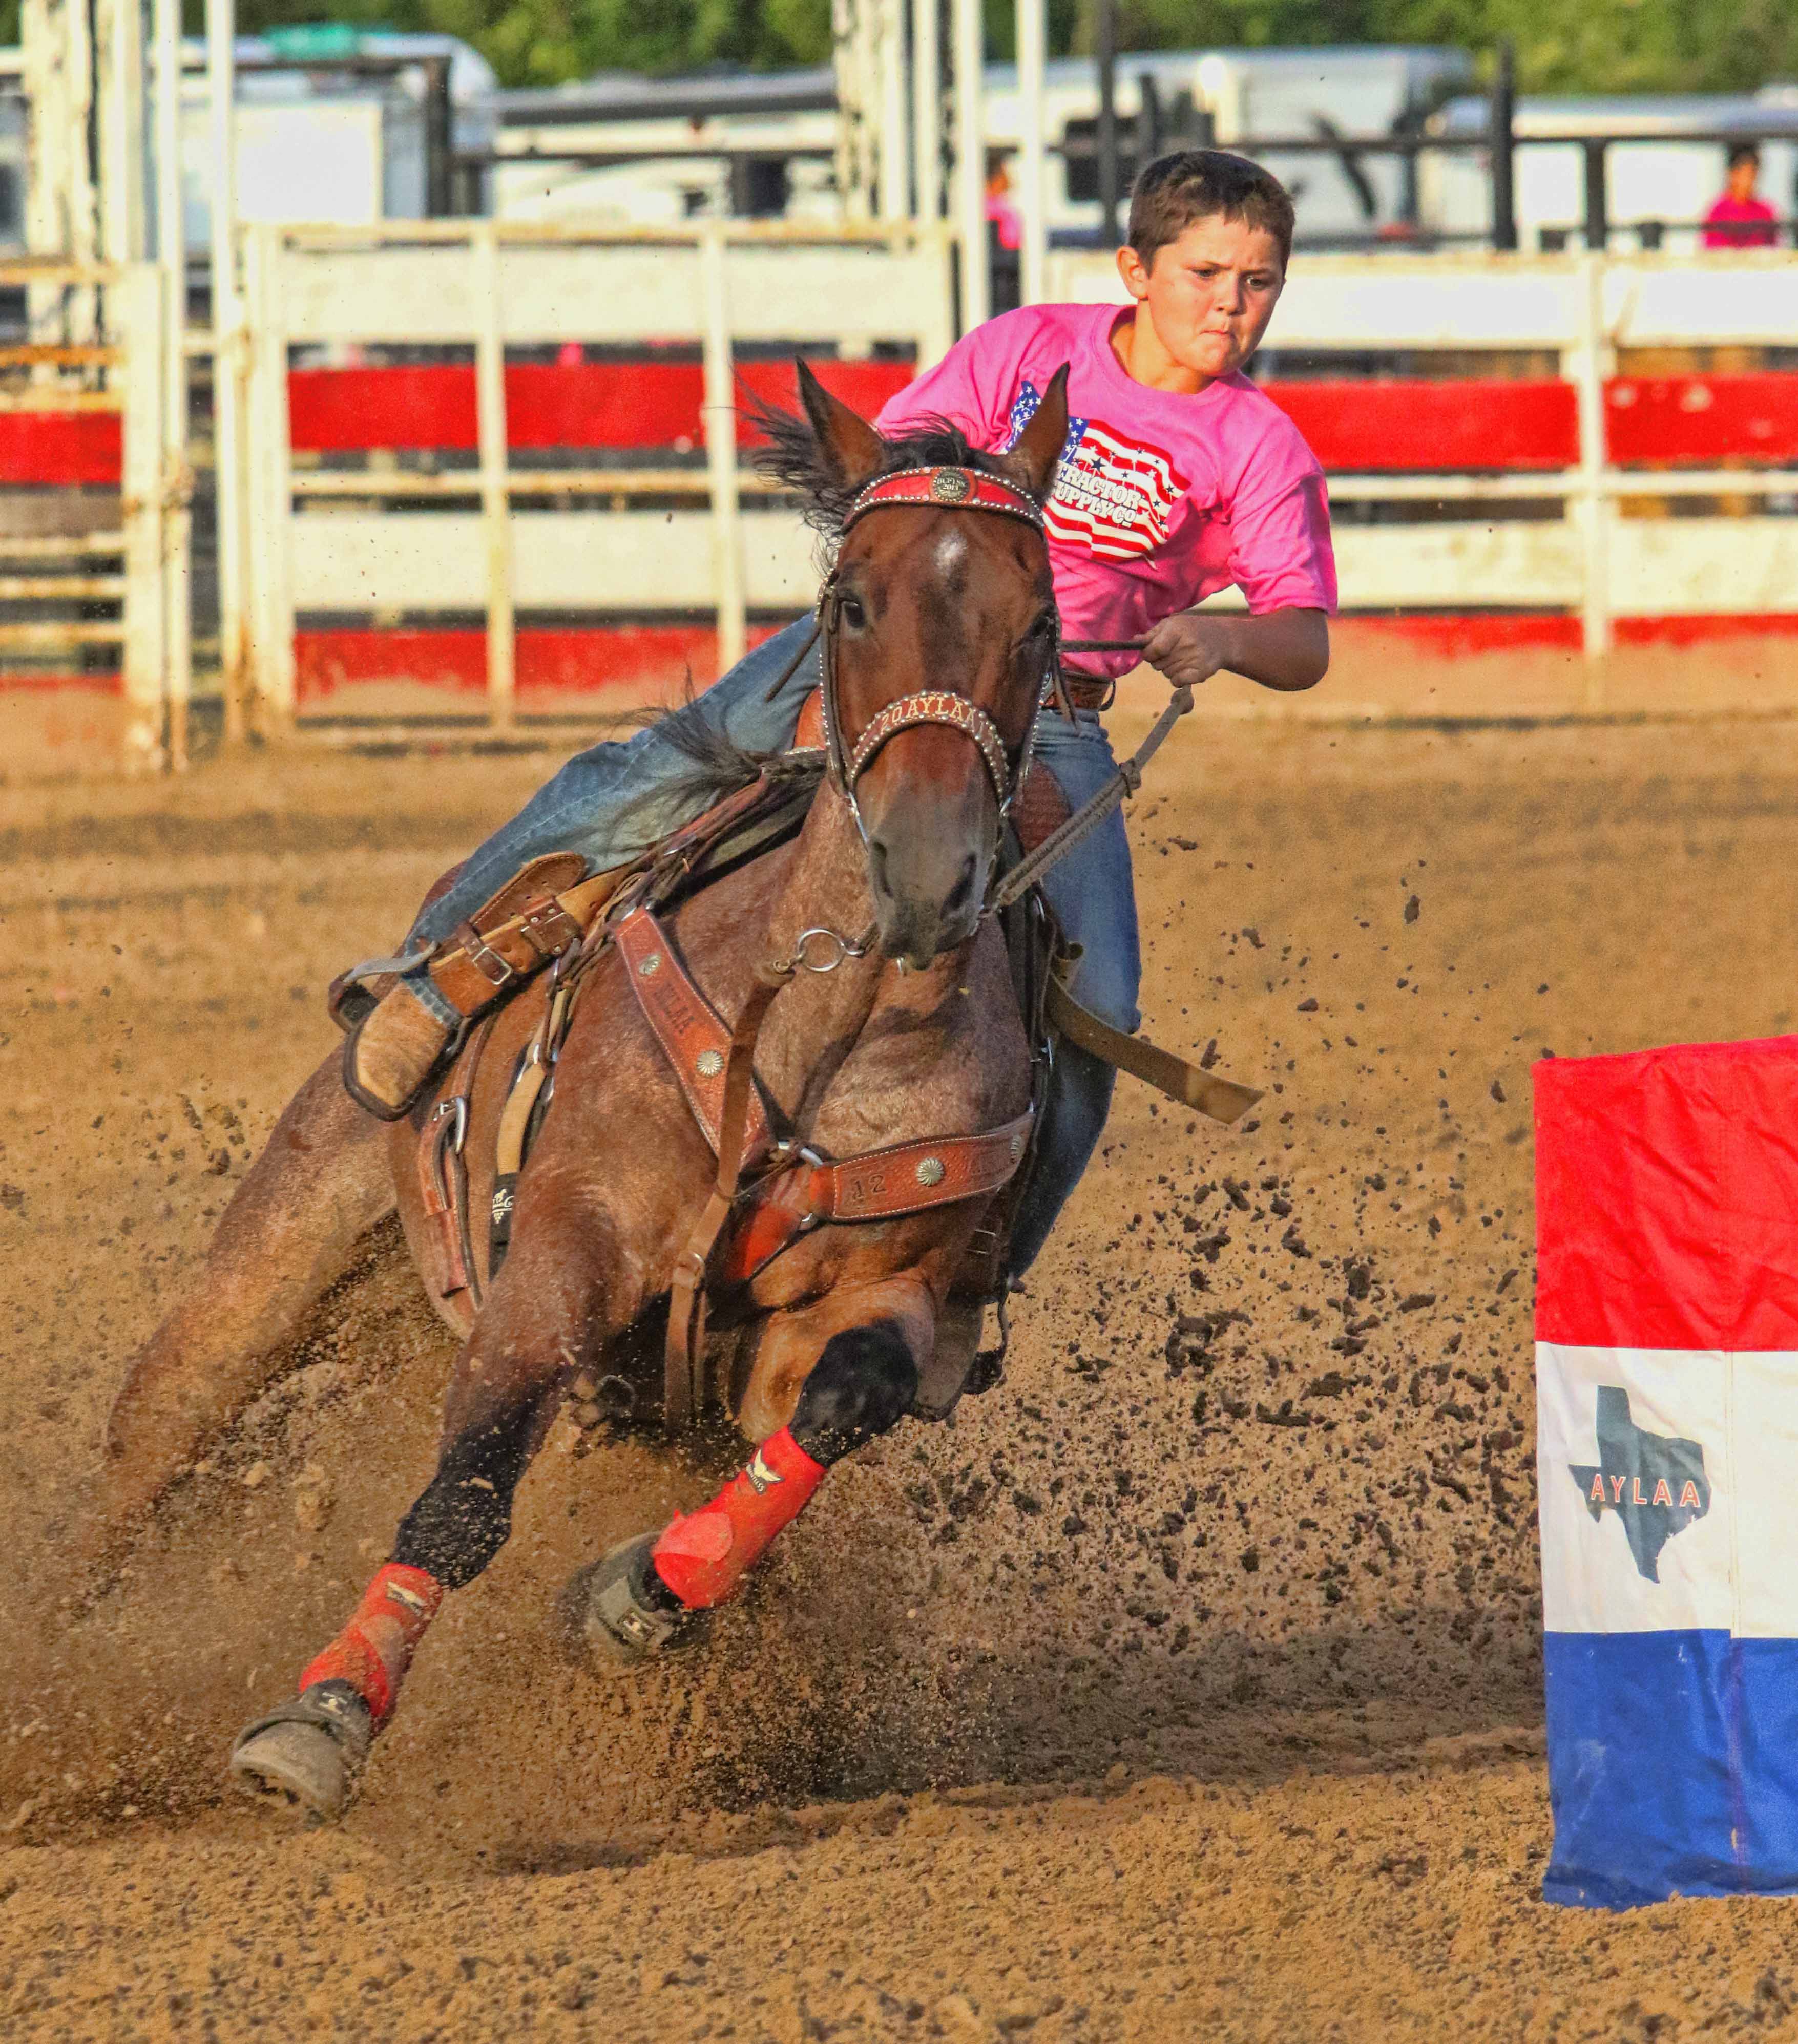 how to become a barrel racer professionally